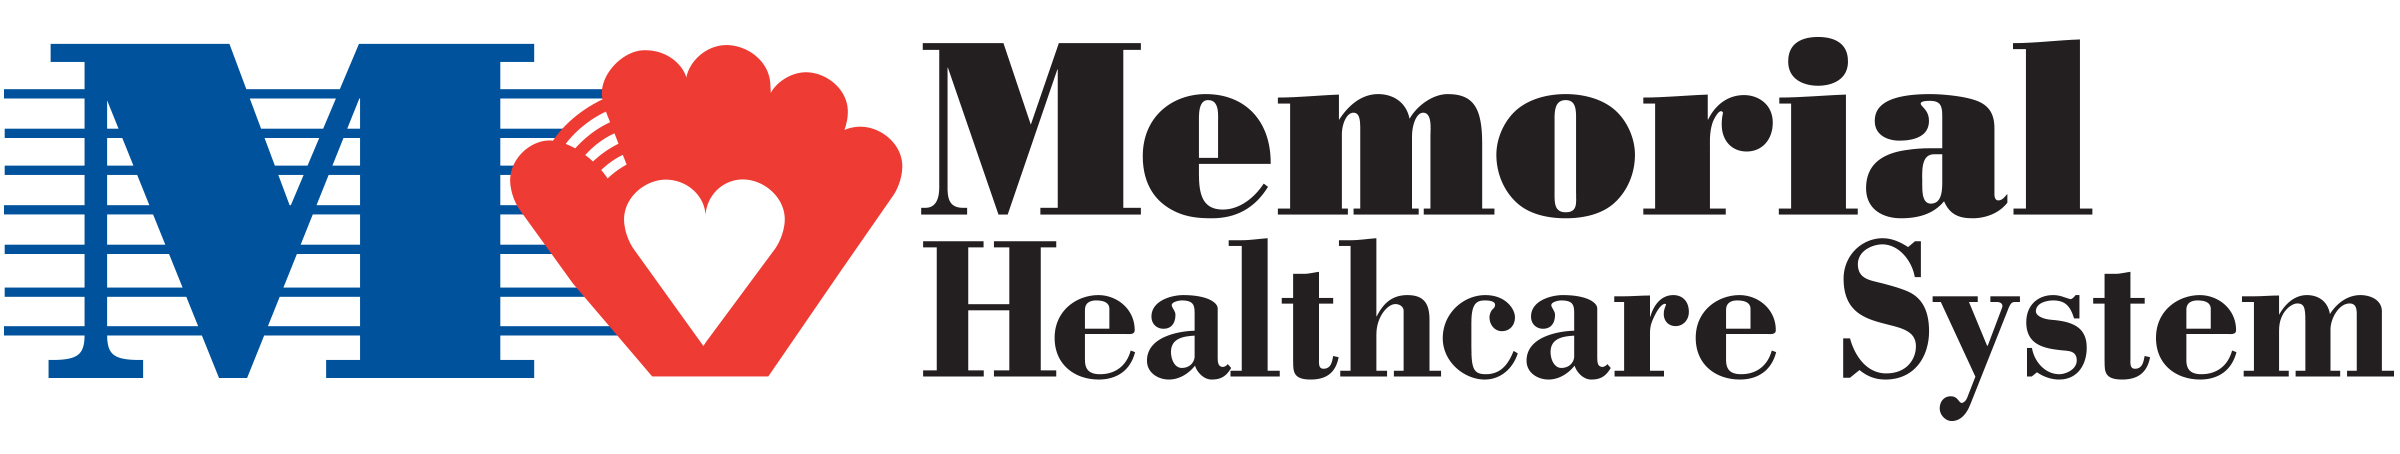 South Florida-based Memorial Healthcare System is a national leader in quality care and patient, physician, and employee satisfaction